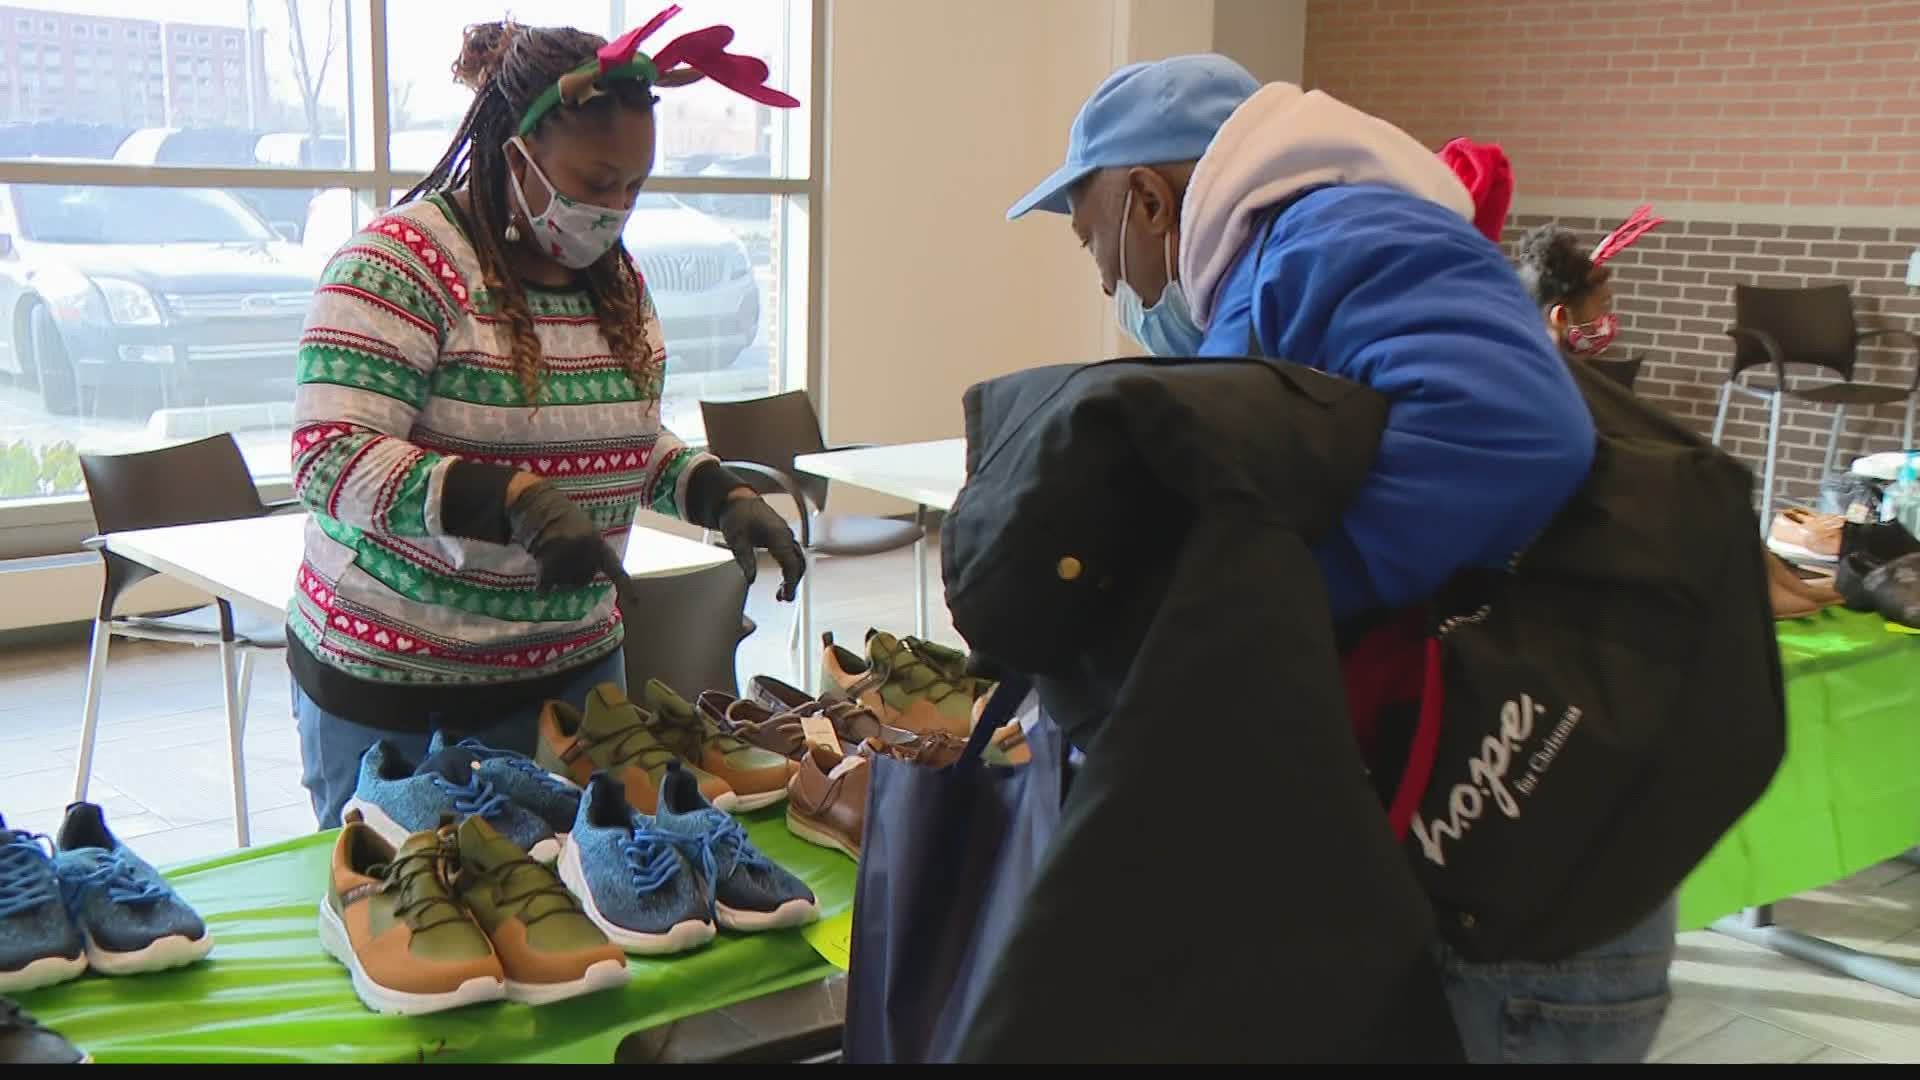 A group of volunteers were hoping to spread a little holiday cheer to Hoosiers experiencing homelessness.